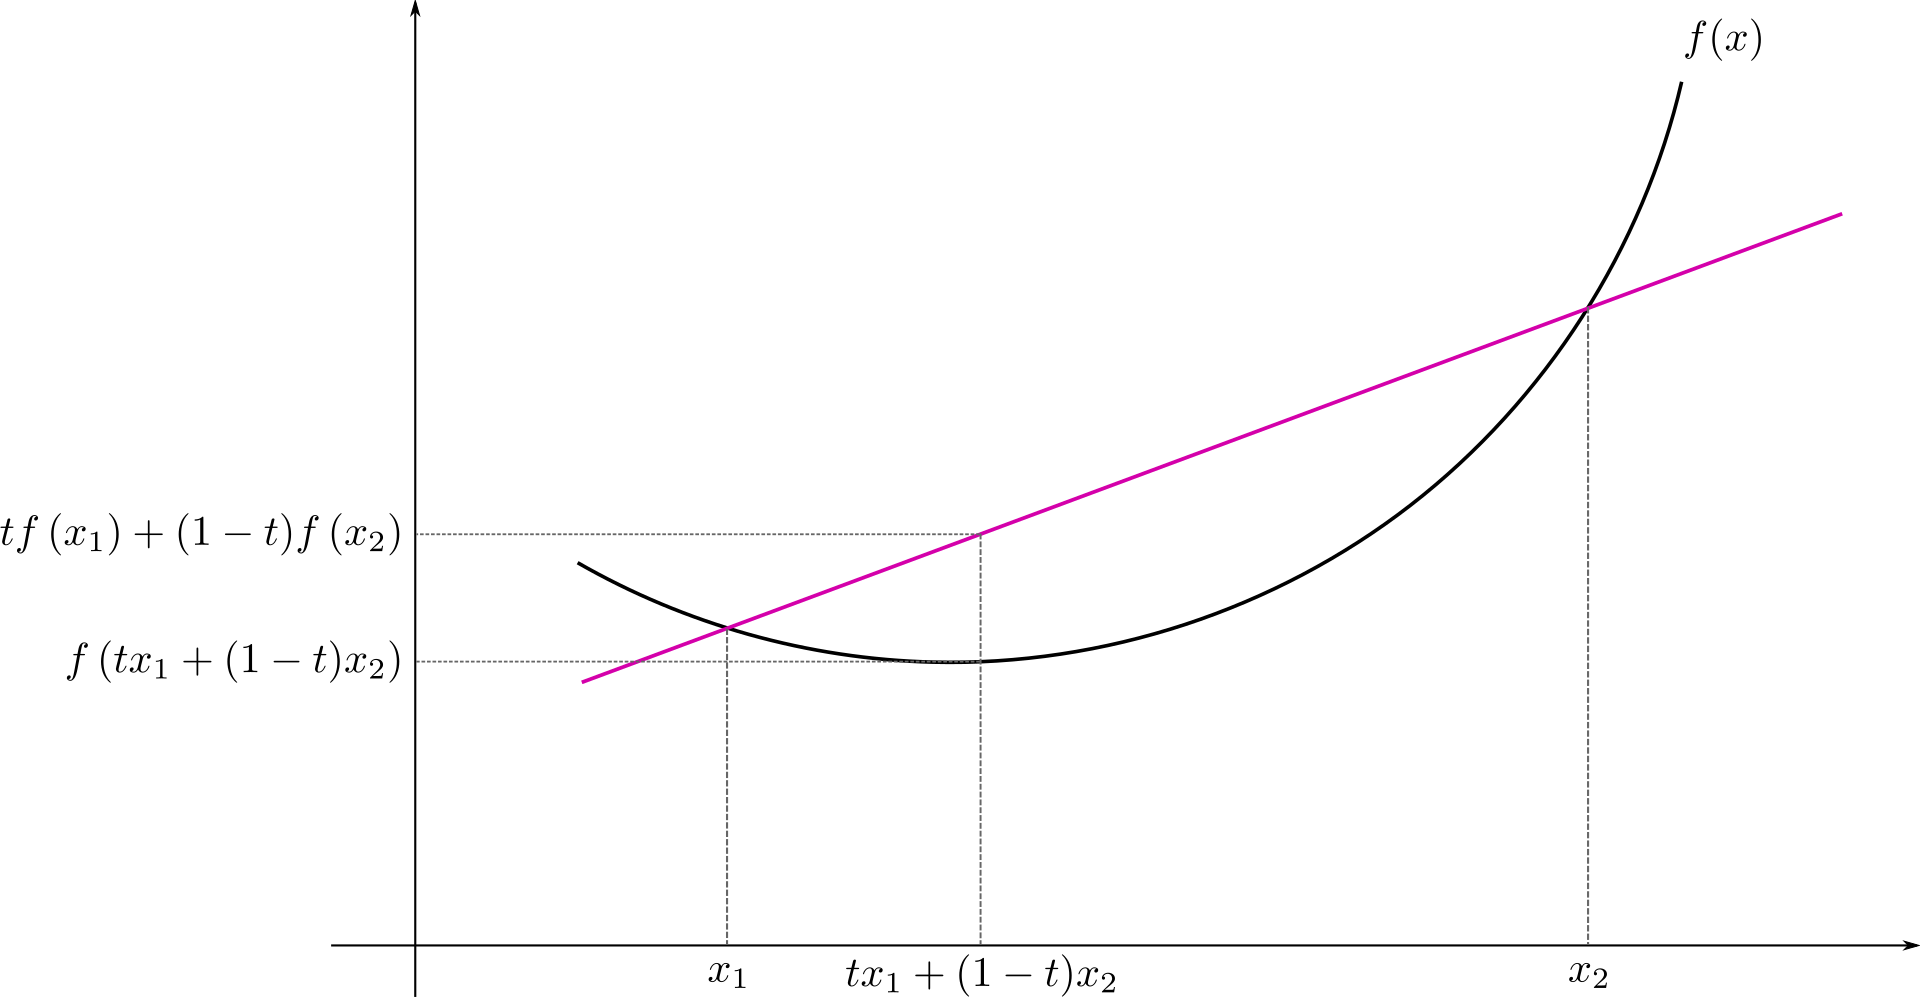 An example of convex function, from wikipedia